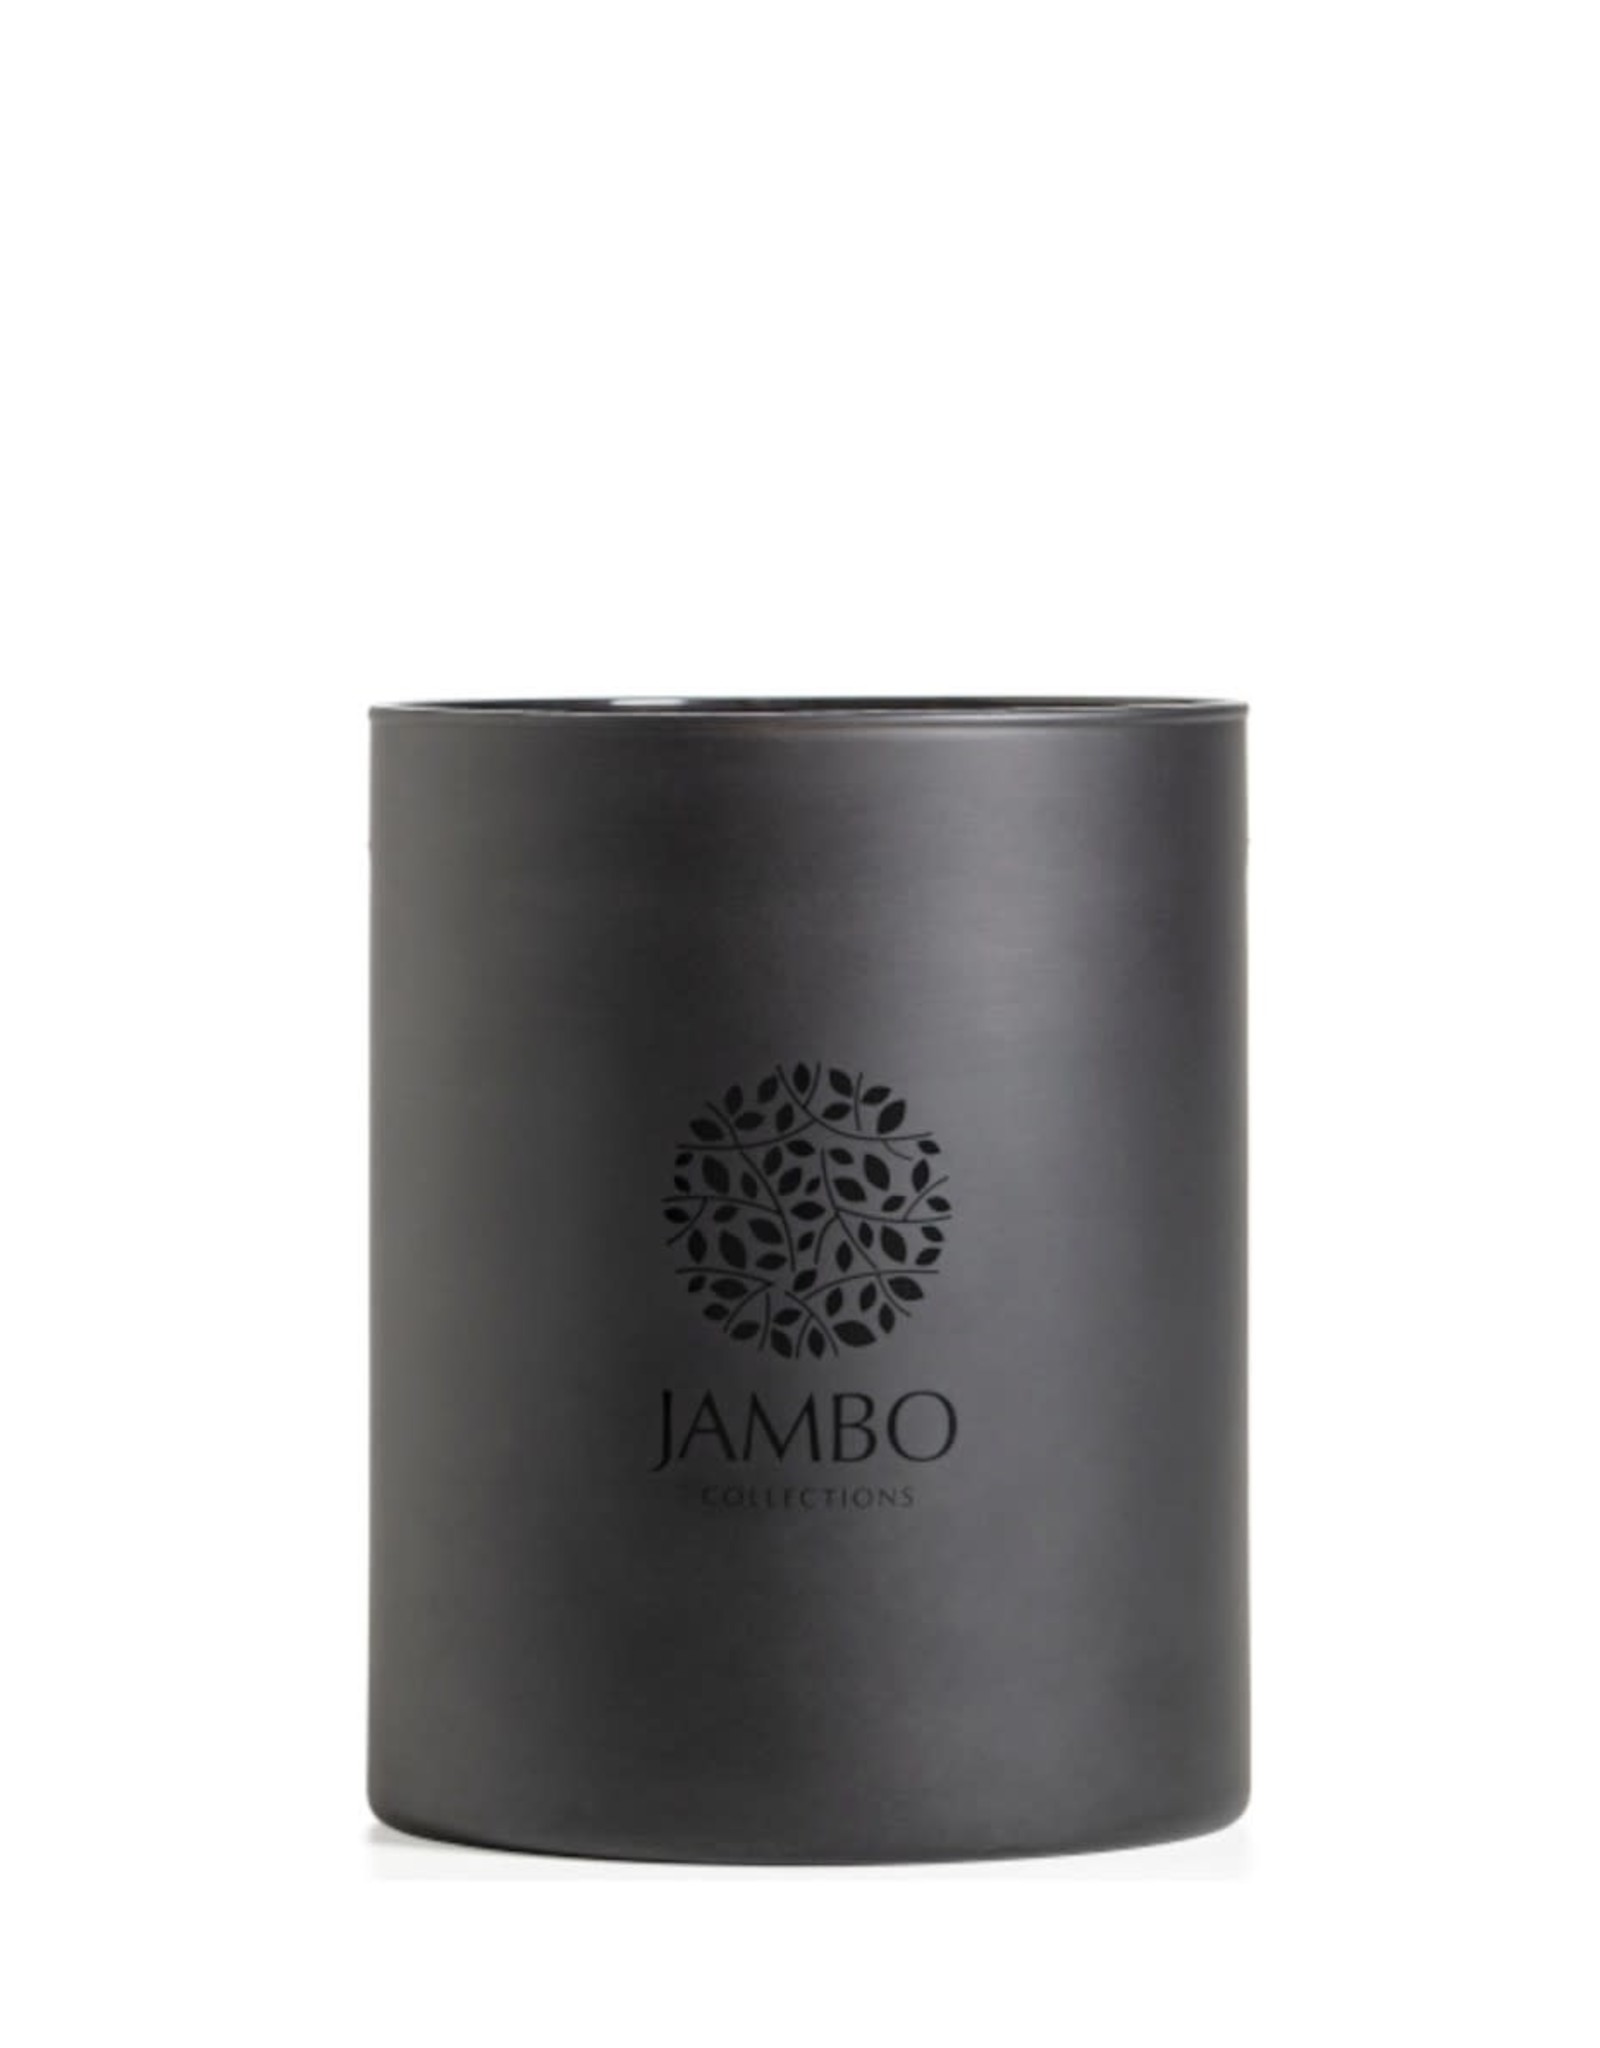 Jambo Collections Candle Pico Turquino (S) D12 H15